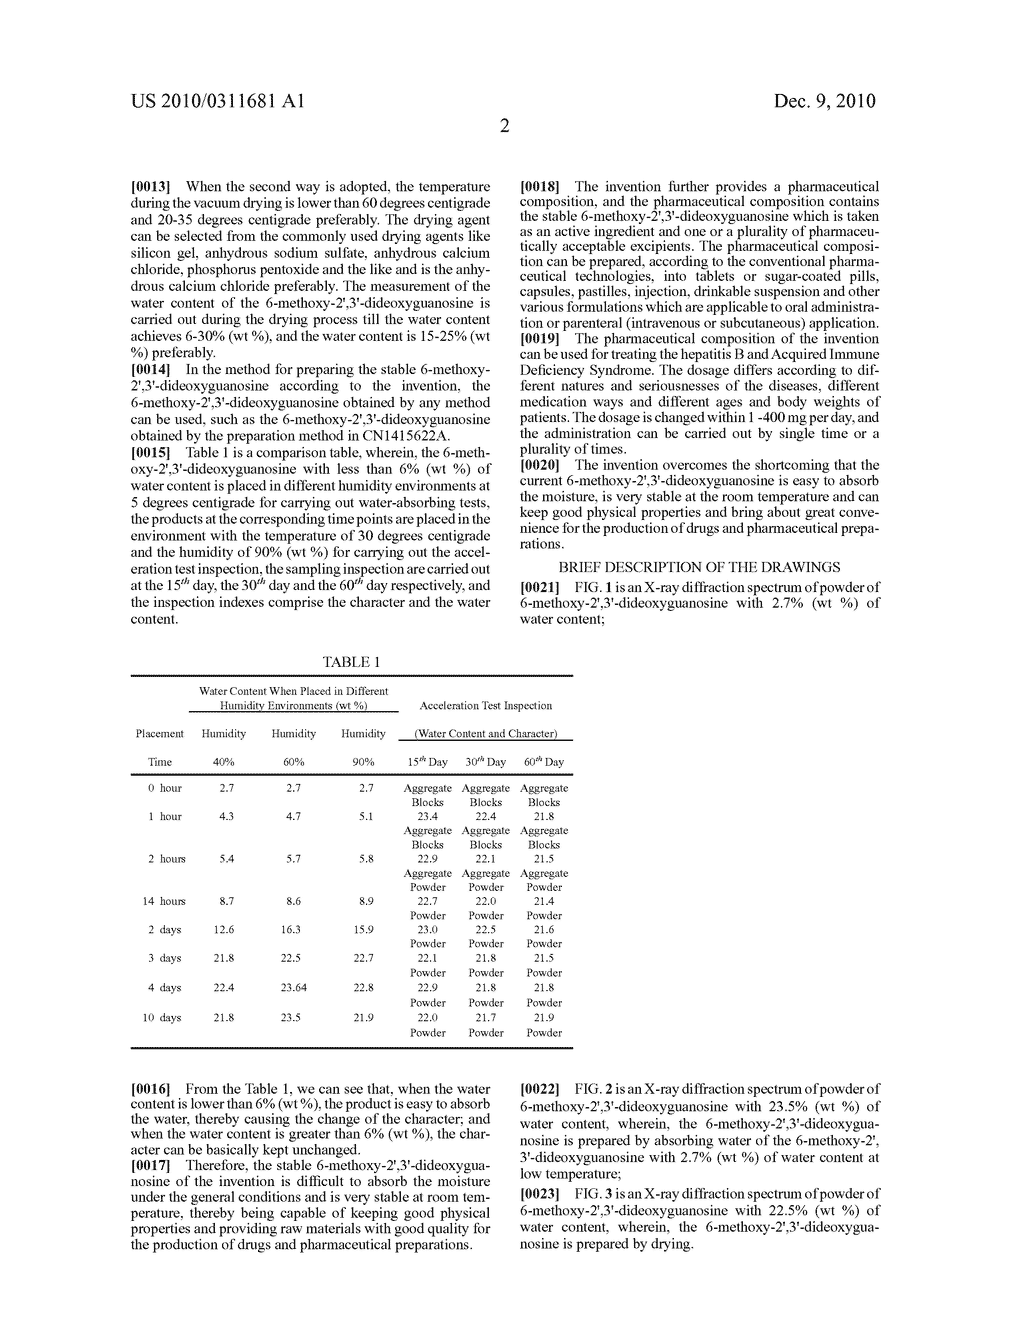 STABLE 6-METHOXY-2',3'-DIDEOXYGUANOSINE, METHOD FOR PREPARING THE SAME AND PHARMACEUTICAL COMPOSITION CONTAINING THE SAME - diagram, schematic, and image 06